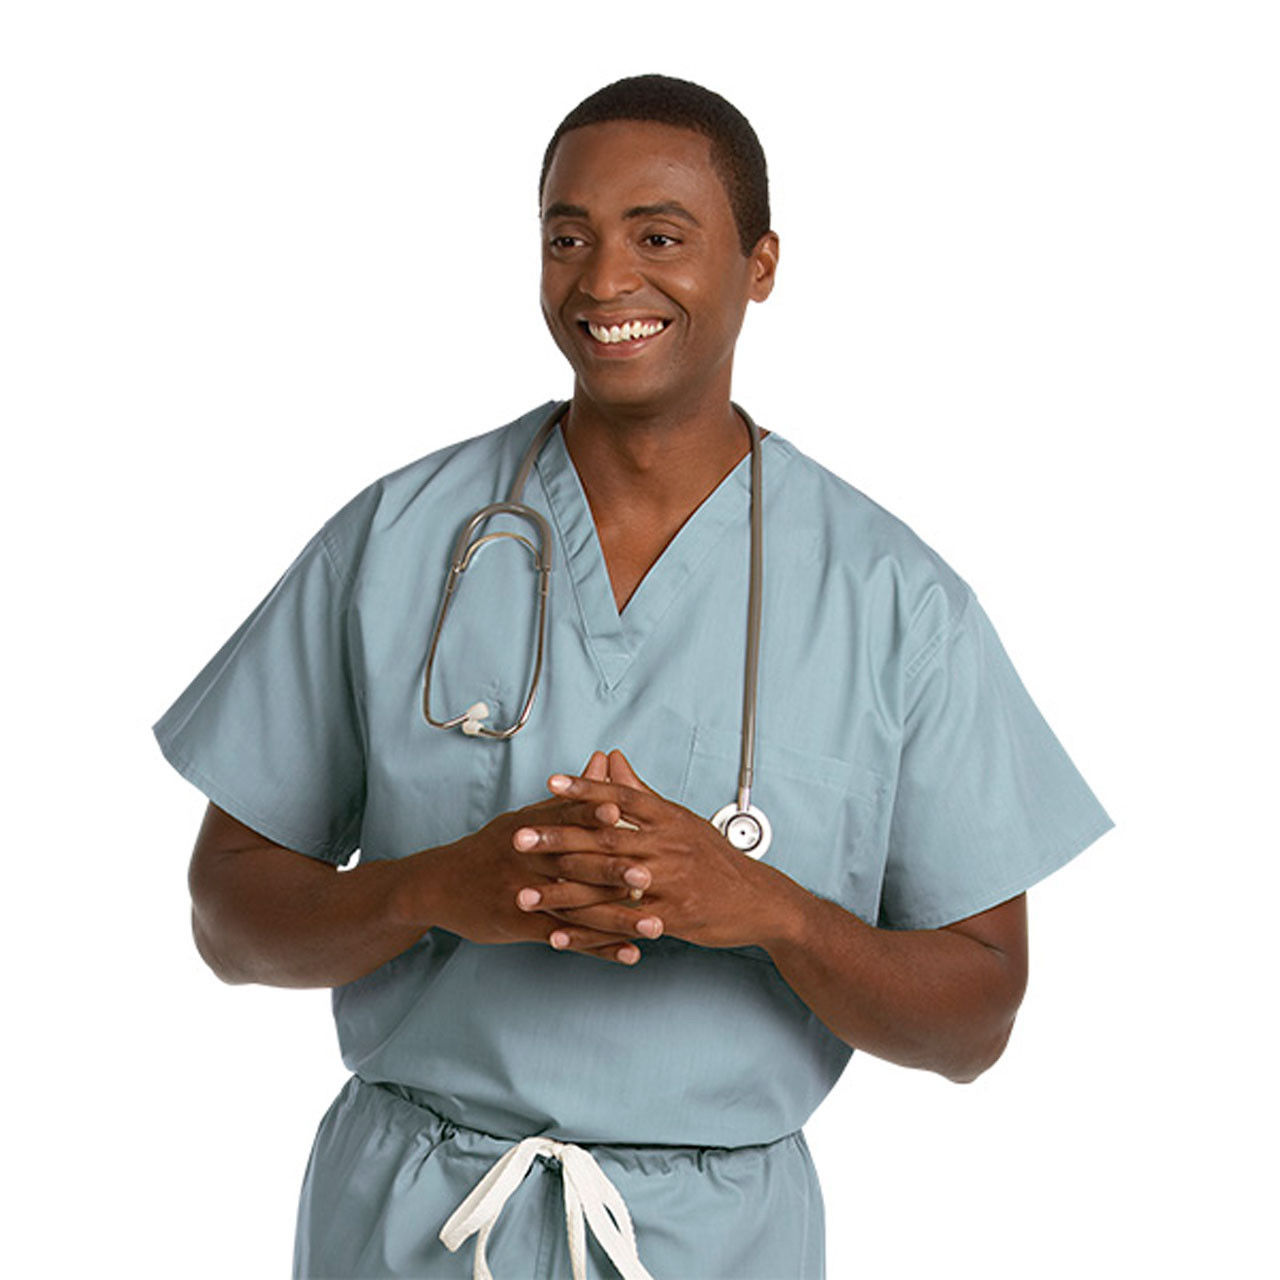 For which industries are these surgical scrubs suitable?